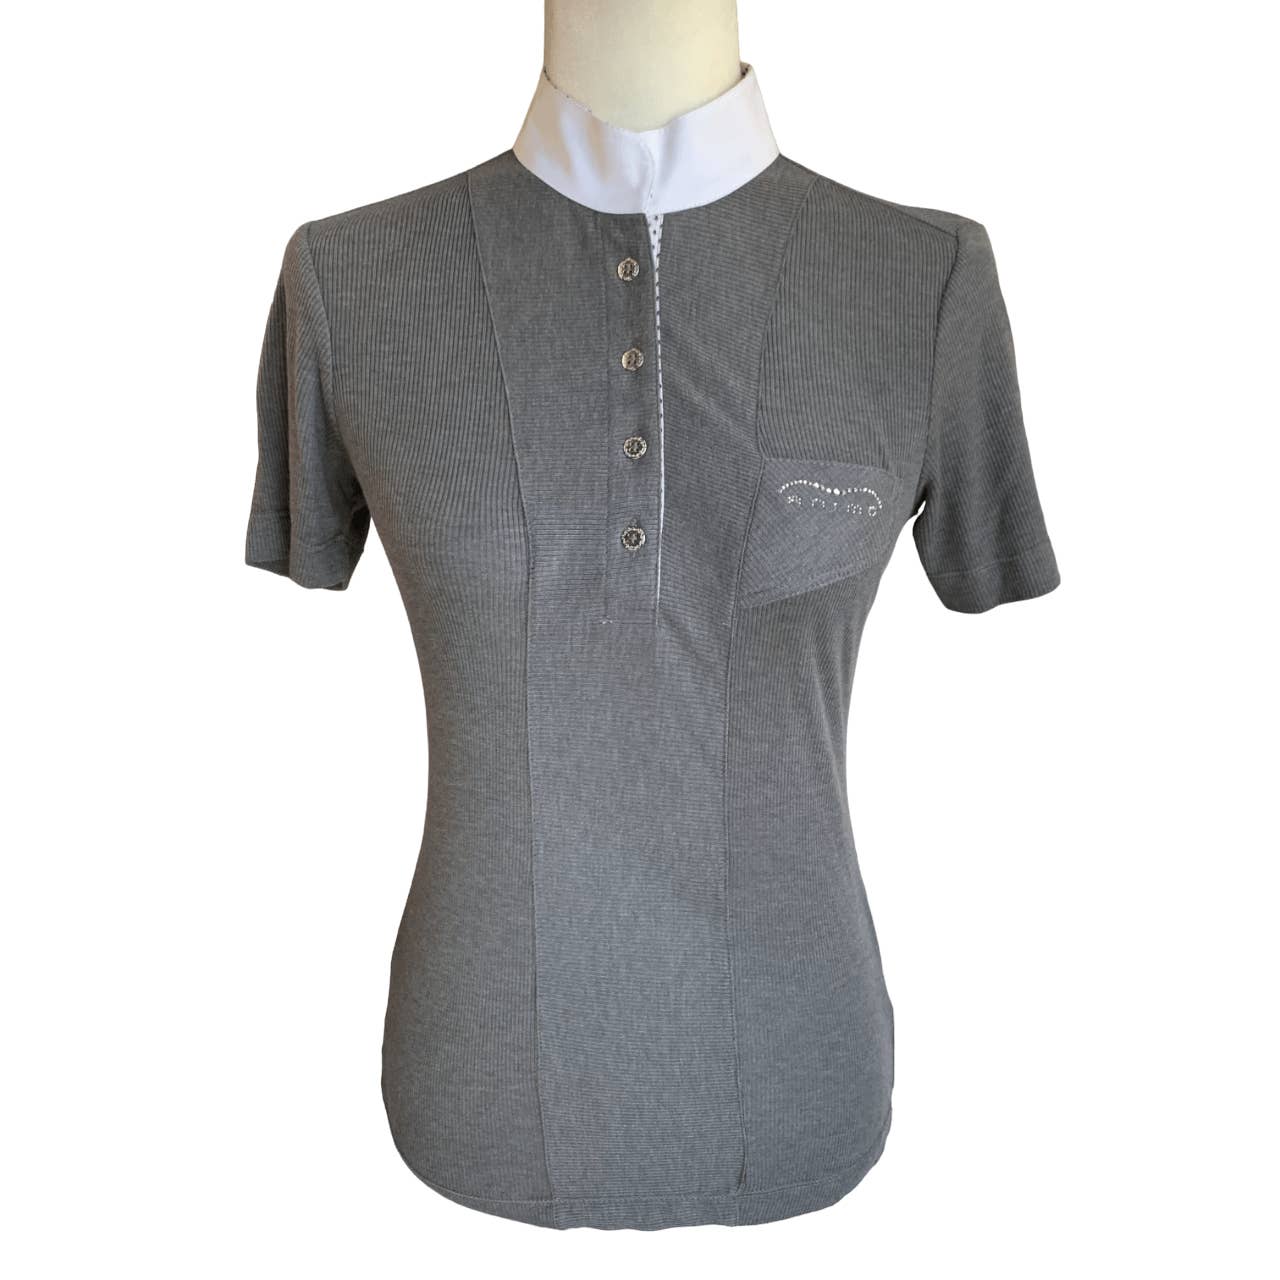 Animo Competition Polo in Grey - I-42 (Medium)